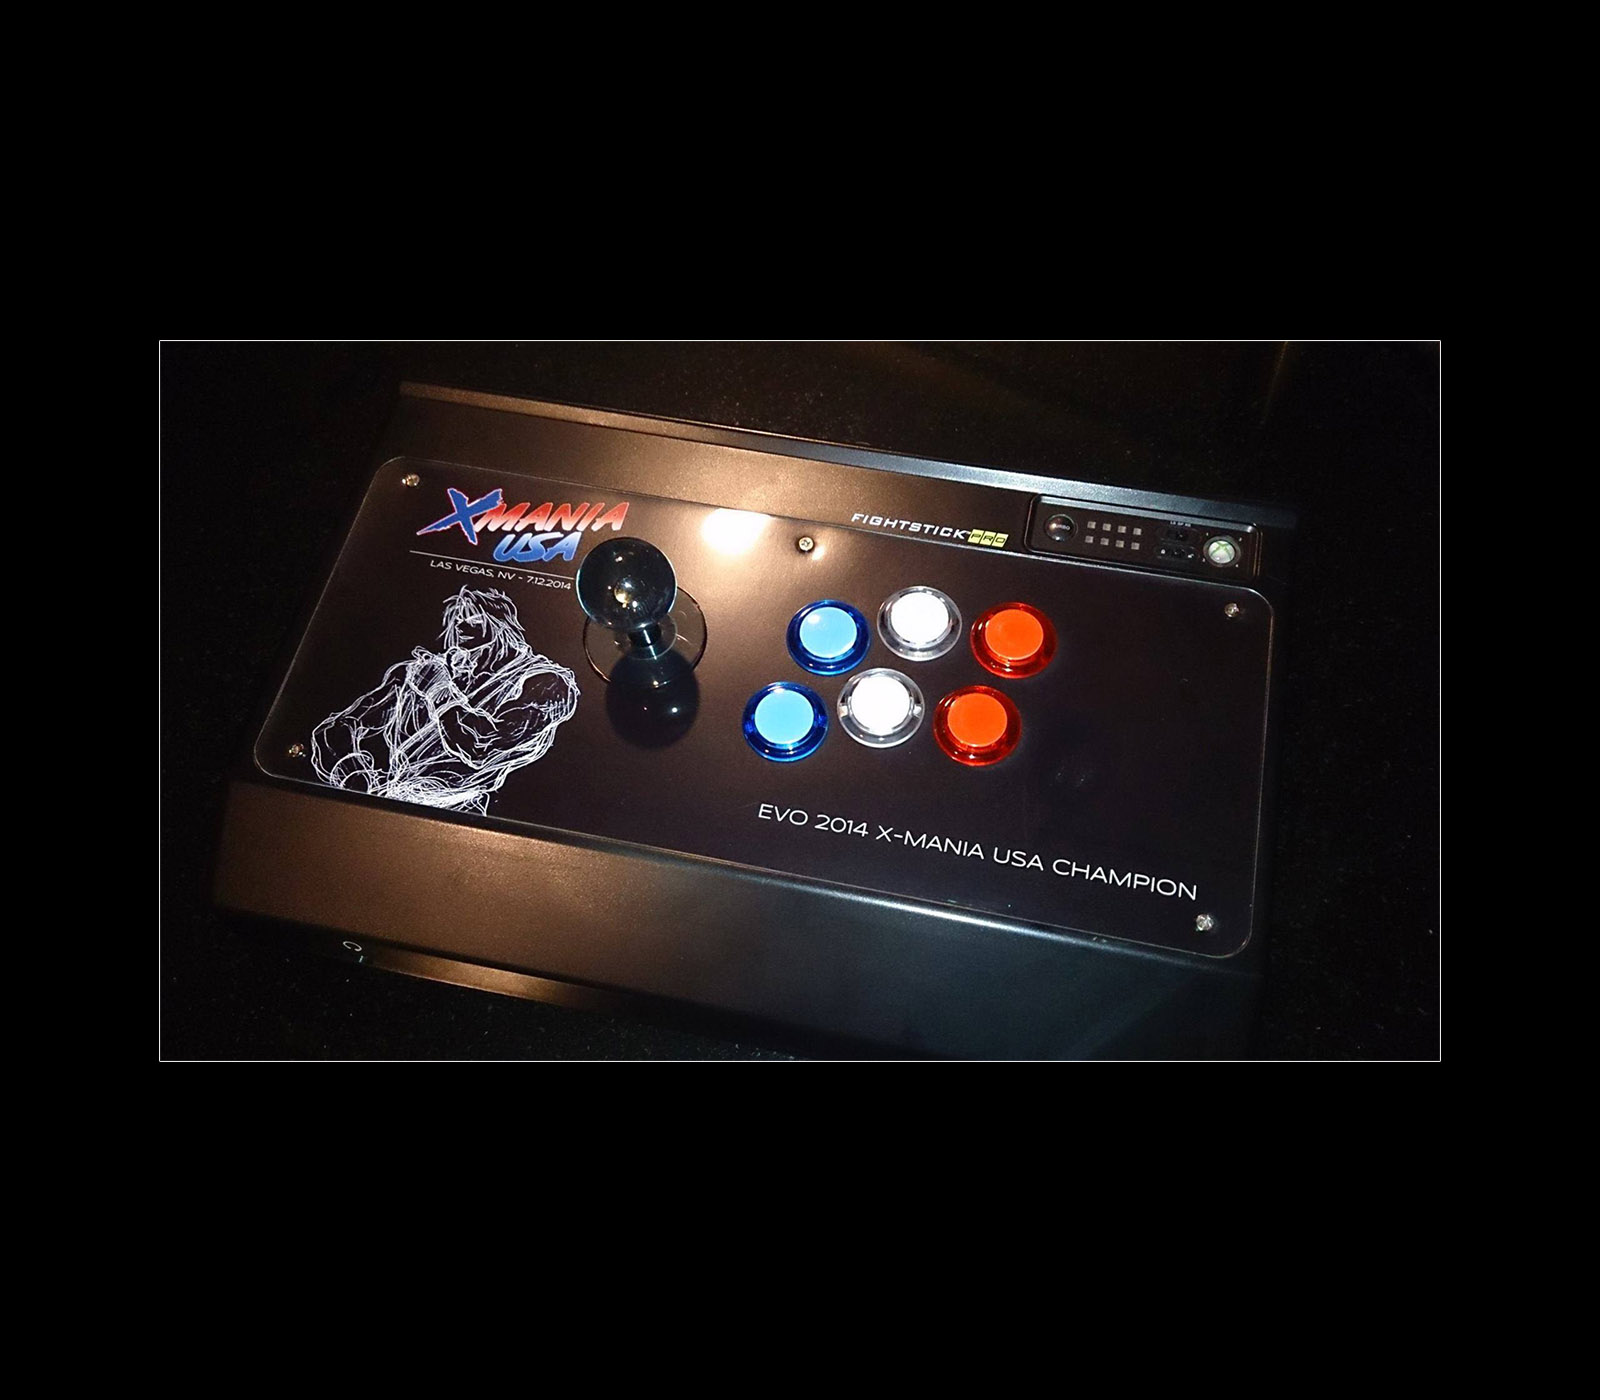 Fightstick with the custom artwork in place